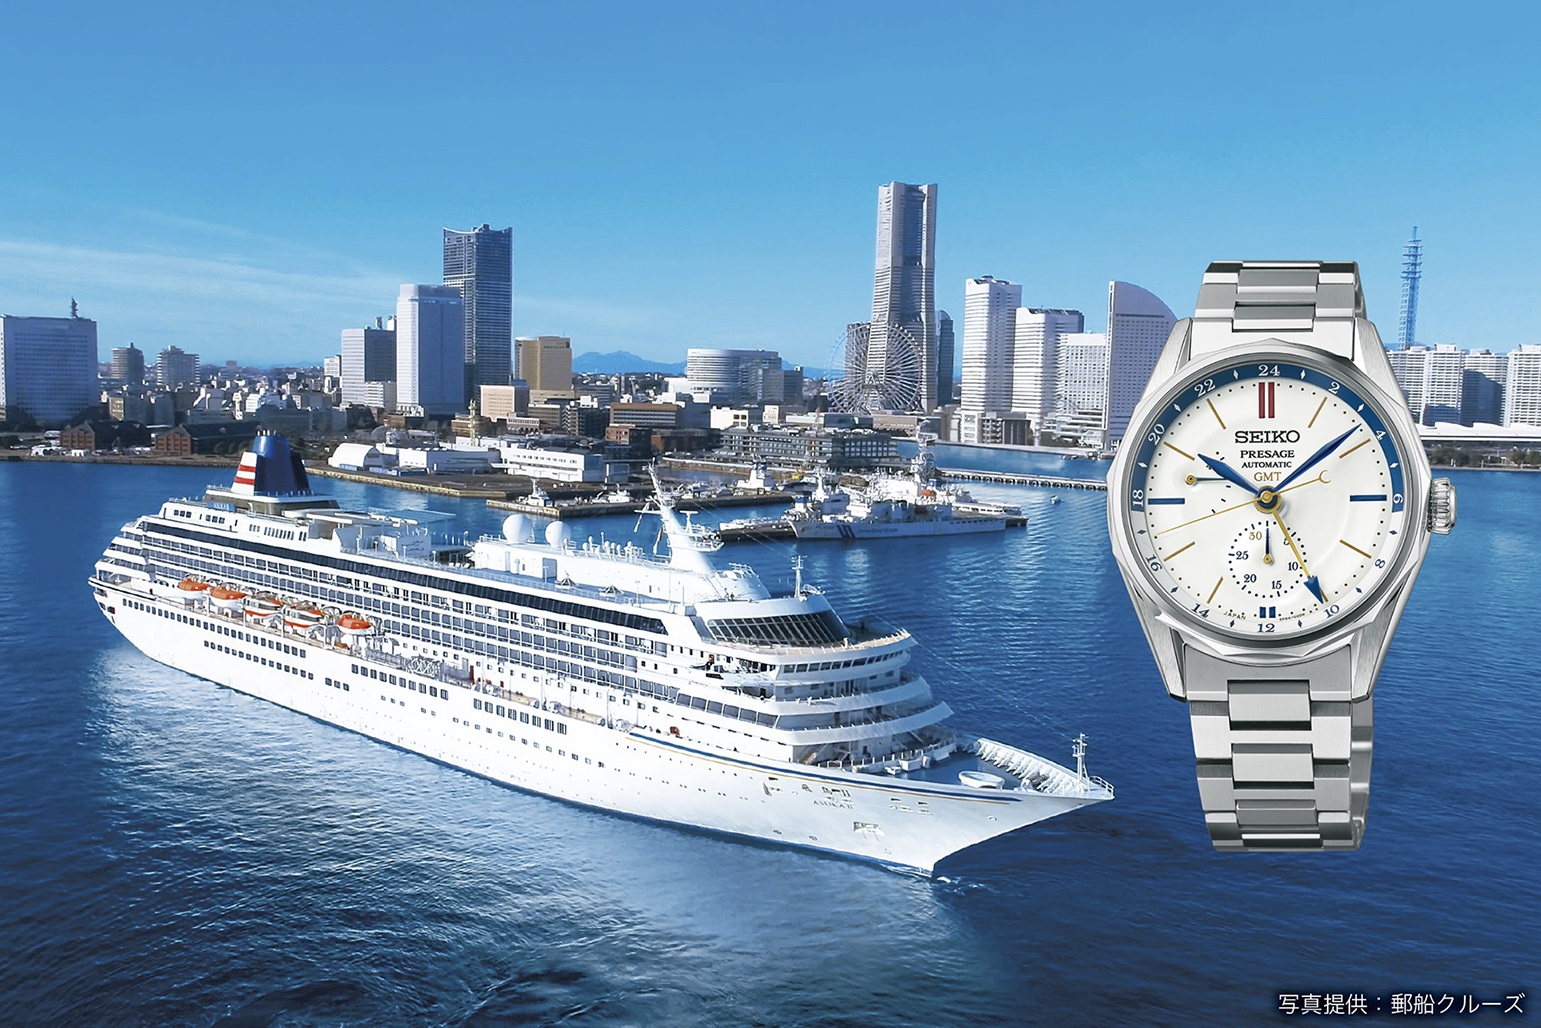 SEIKO] Seiko Presage, a brand that shows off Japan's excellent aesthetic  sense to the world, is releasing a new design series called “Ocean Traveler”.  | EDO TOKYO KIRARI PROJECT